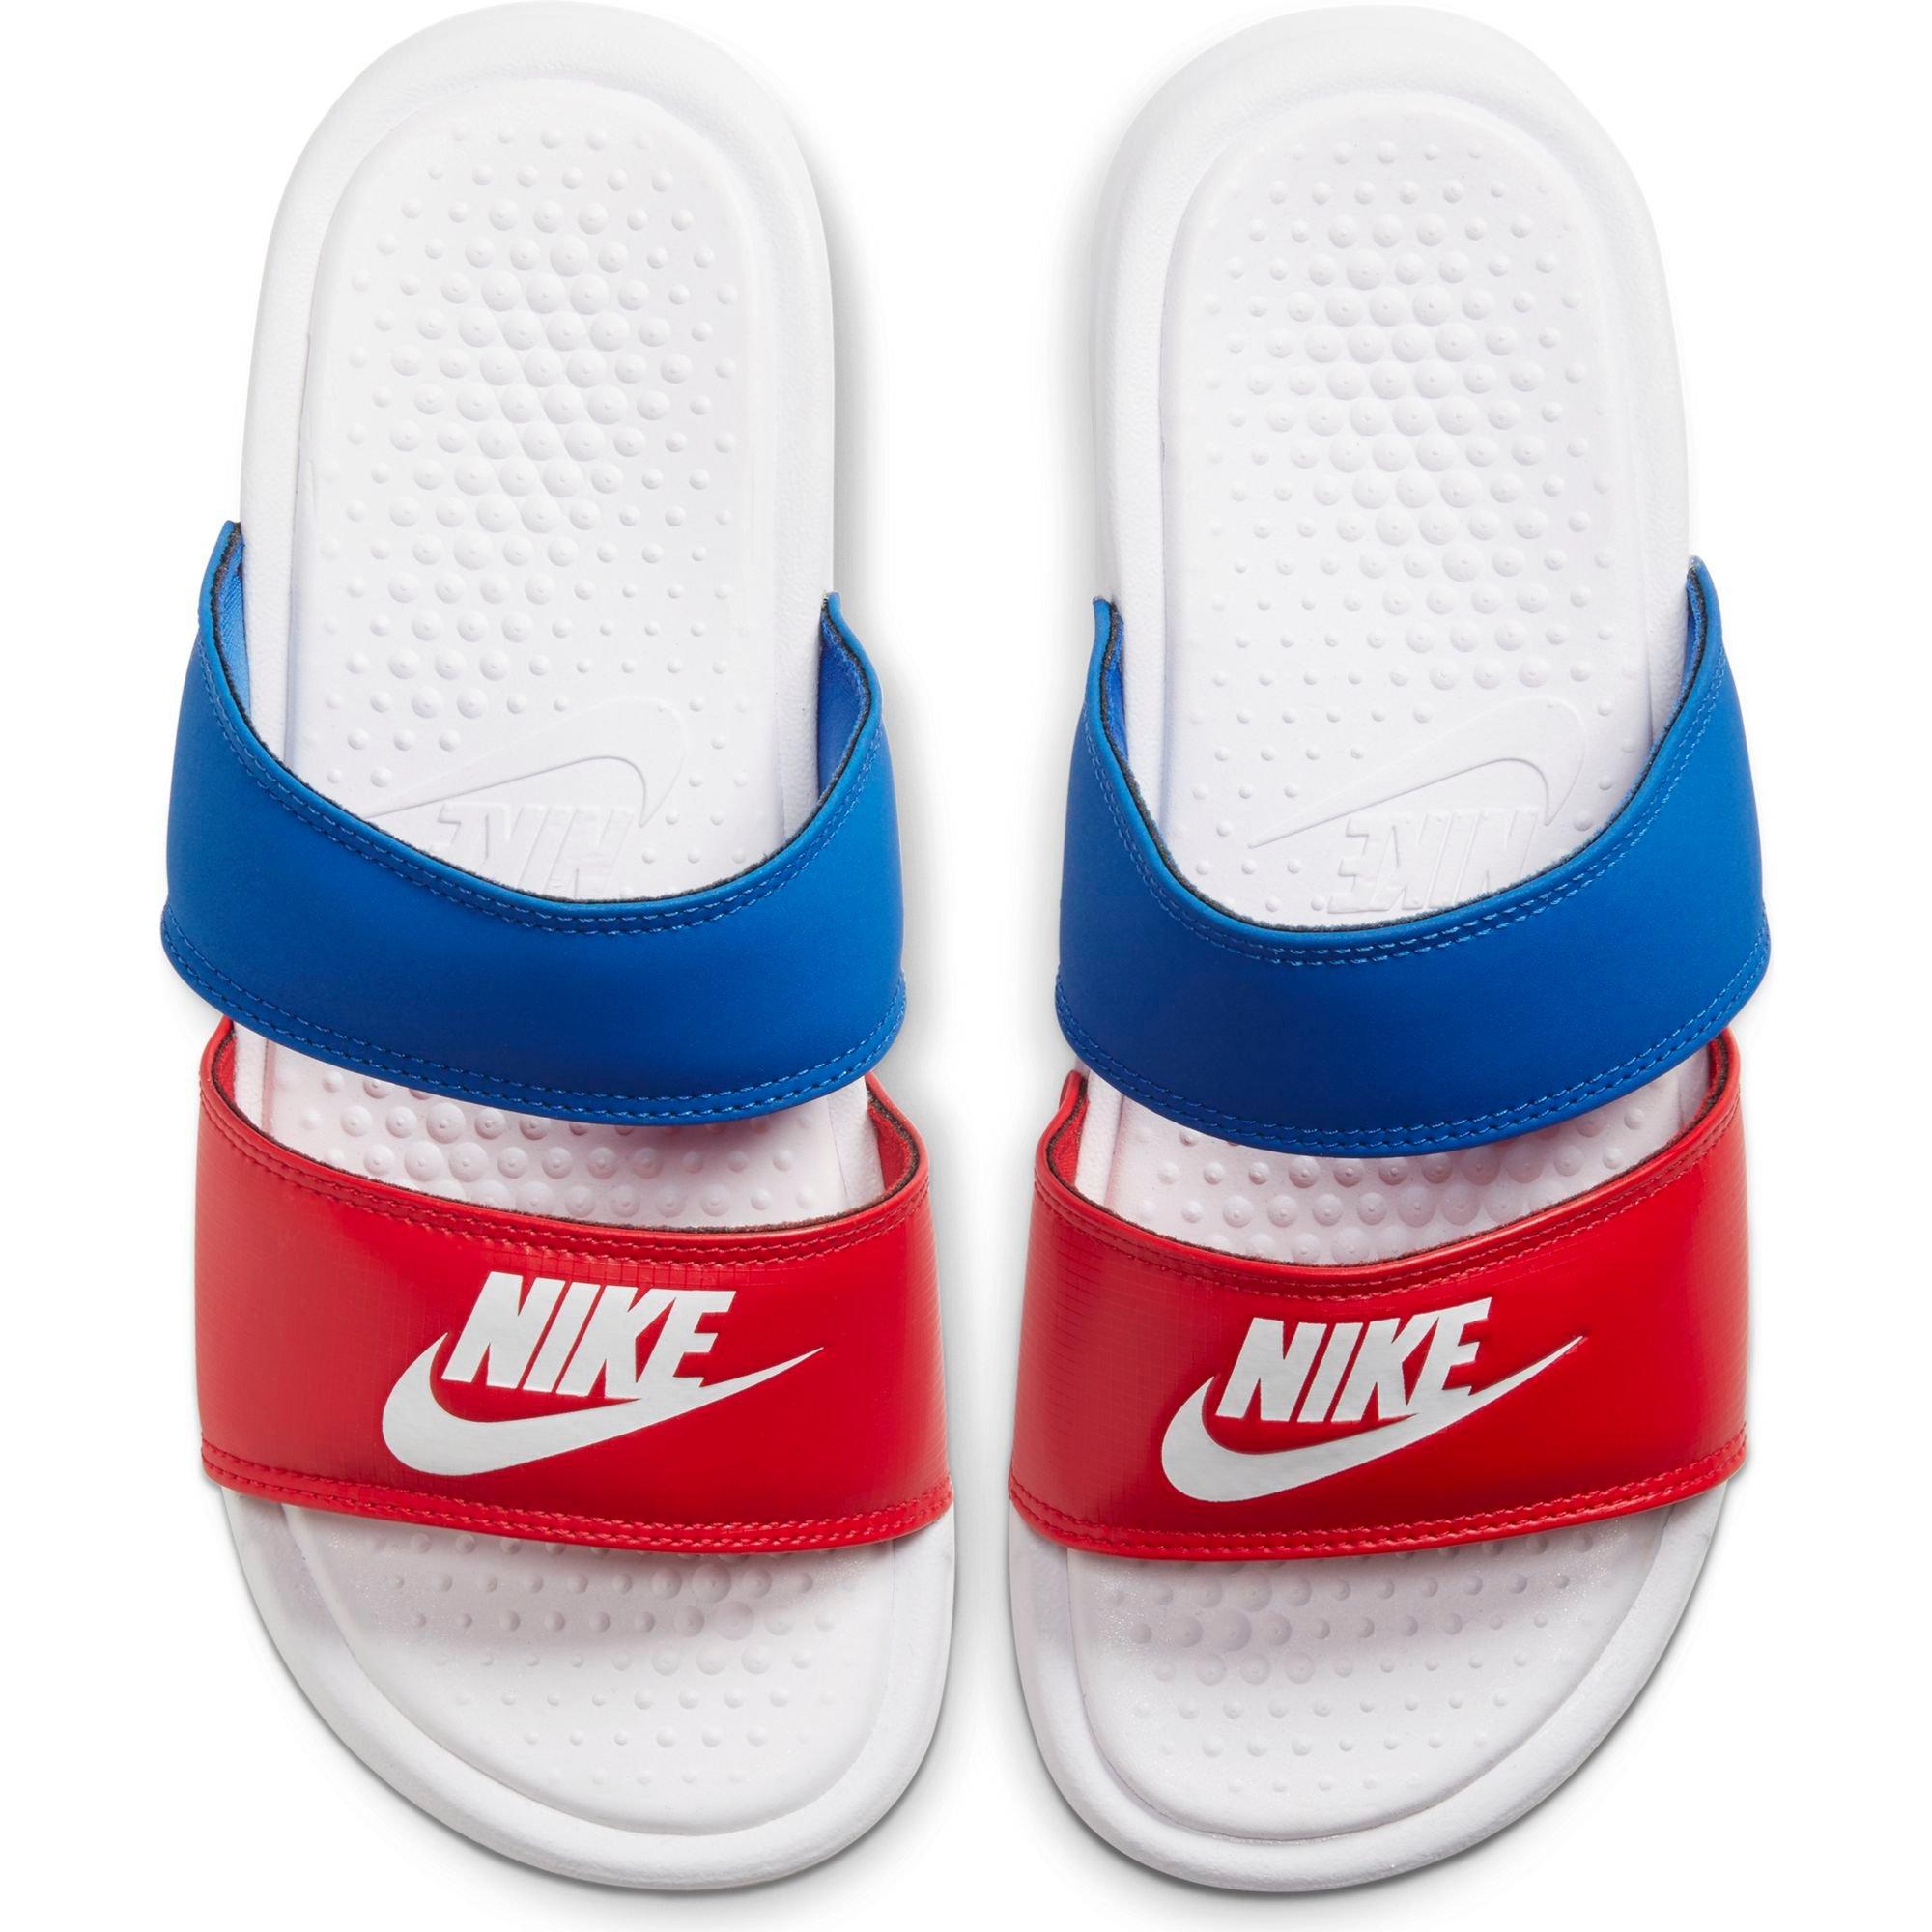 nike slides white and red